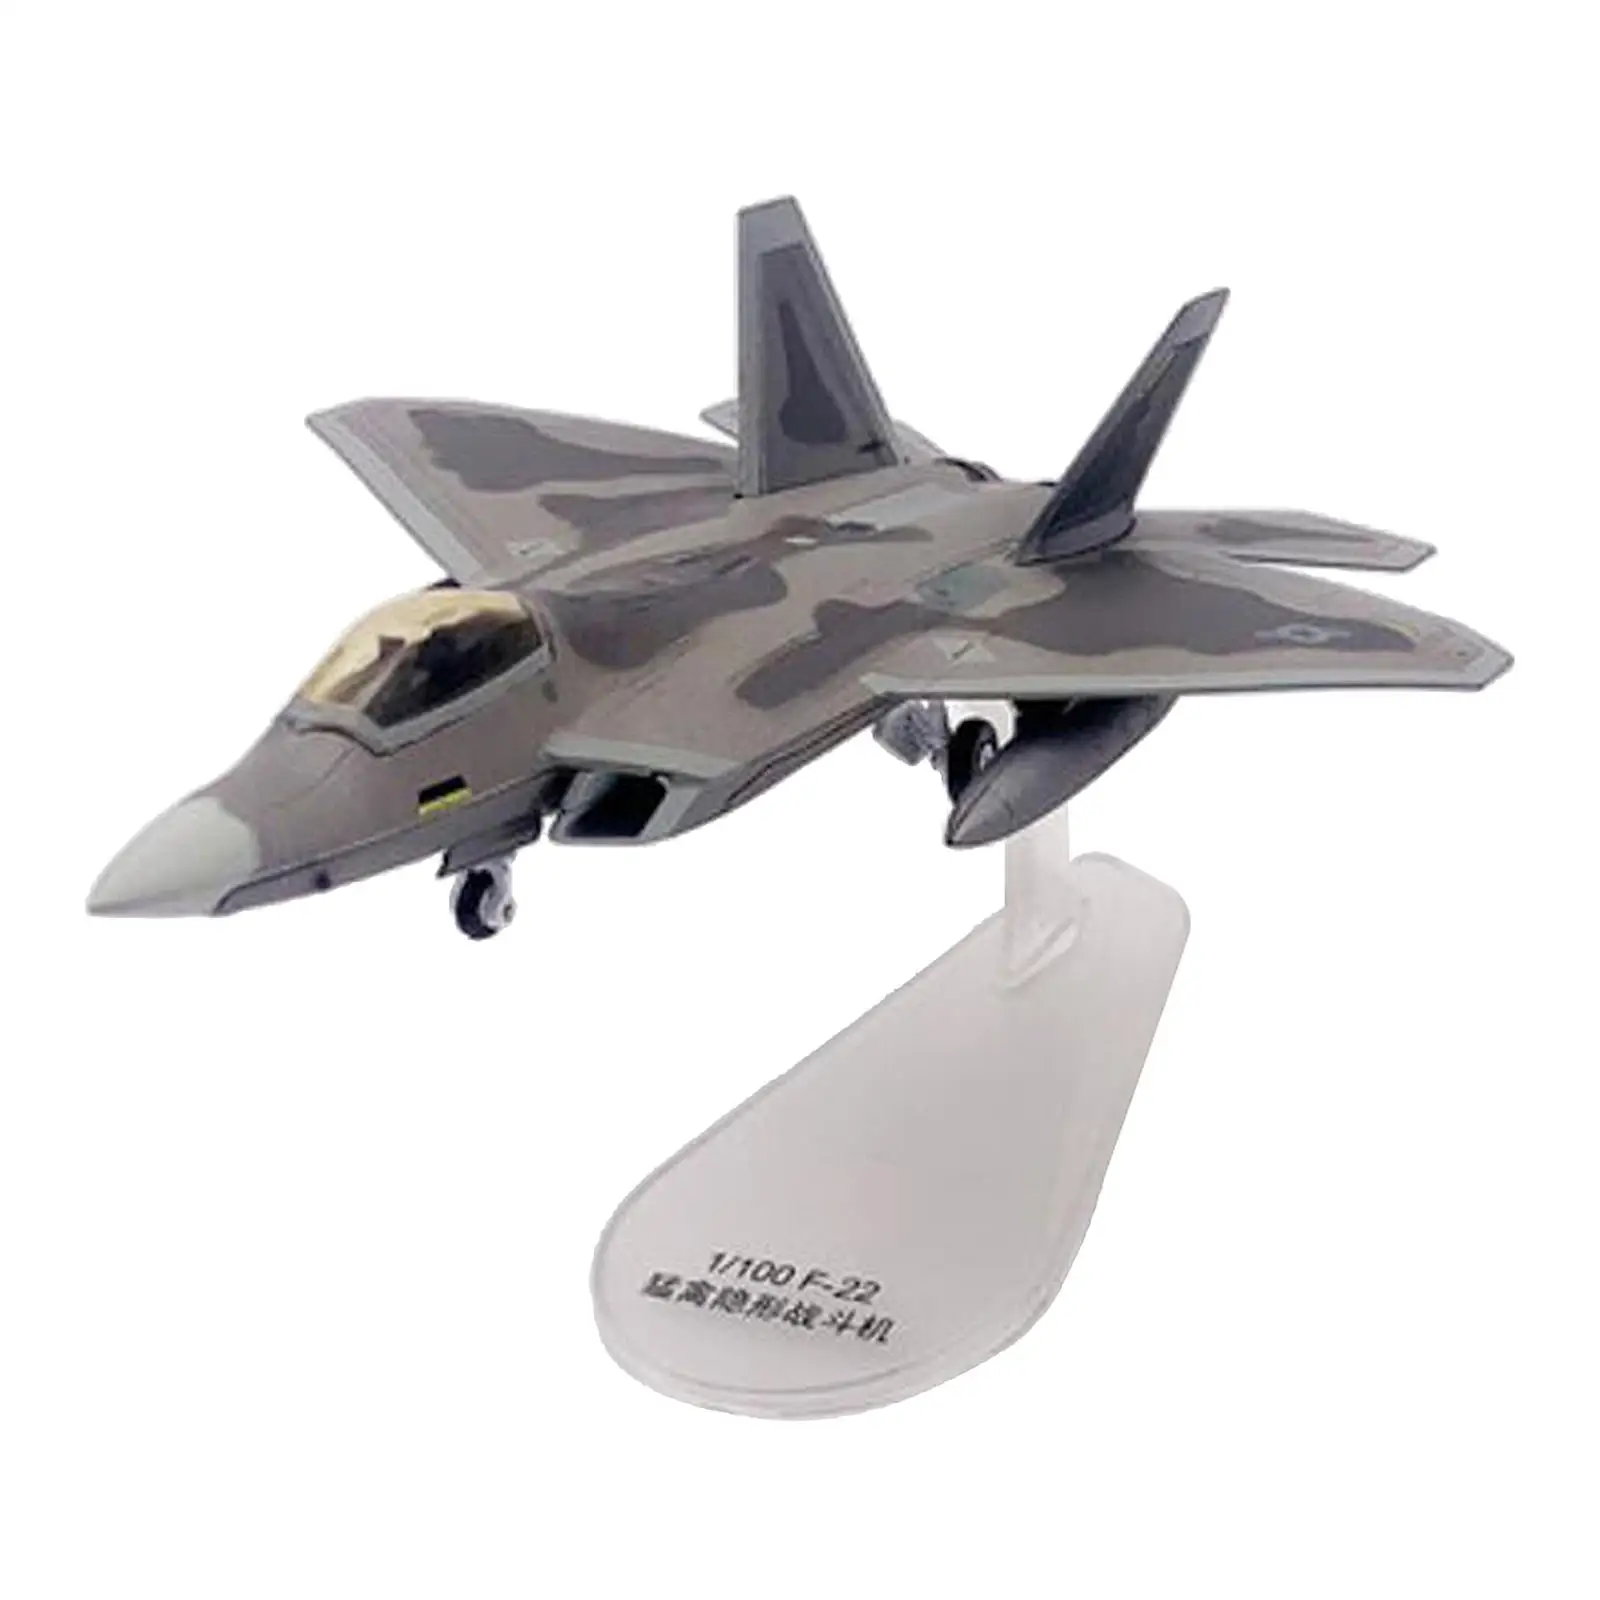 Aircraft Diecast Aircraft Toys for Children Gift Home Office Decor